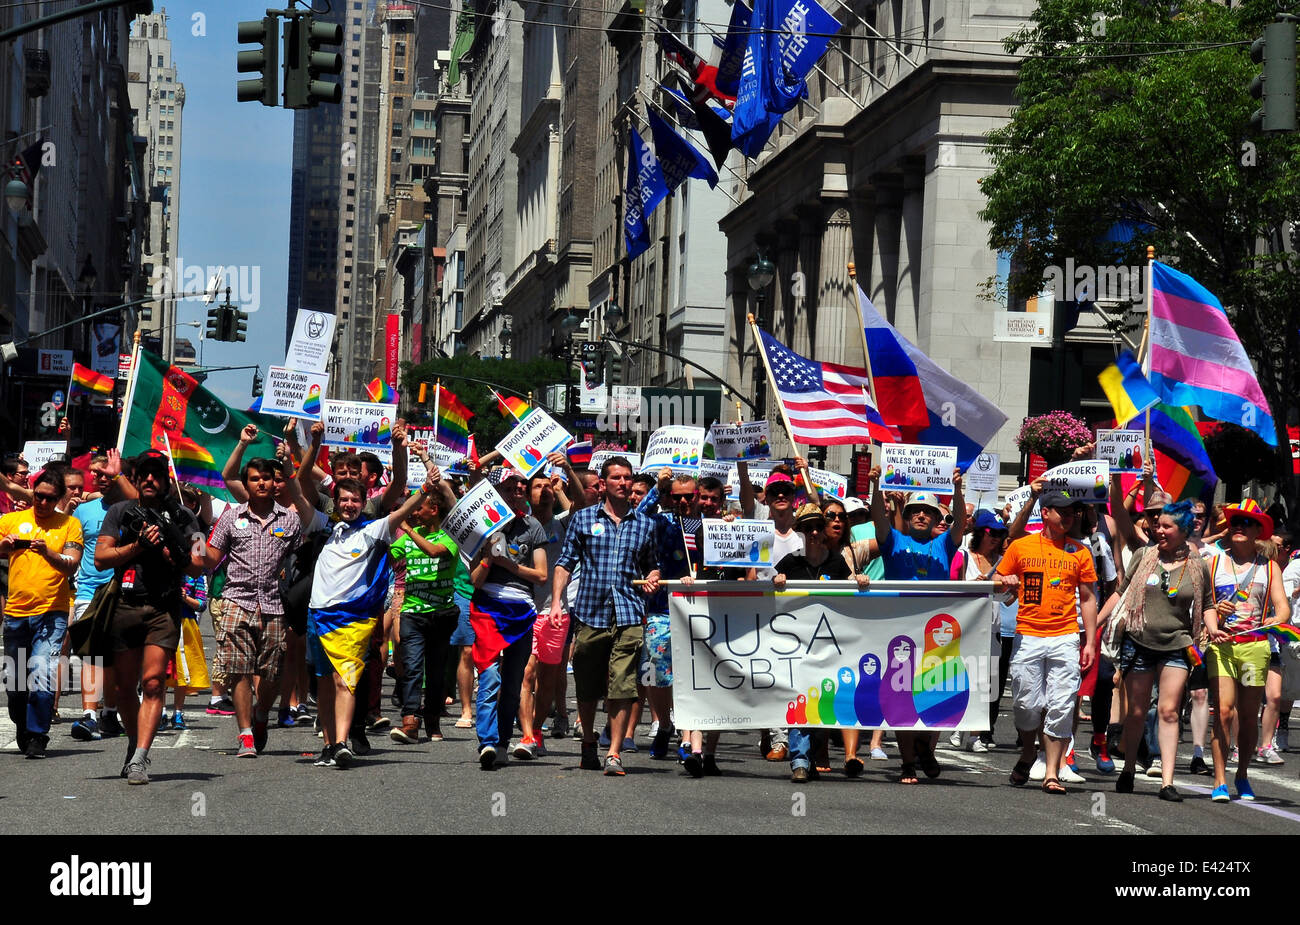 NYC: Gay Russian group from RUSA marching in the 2014 Gay Pride Parade on Fifth Avenue * Stock Photo